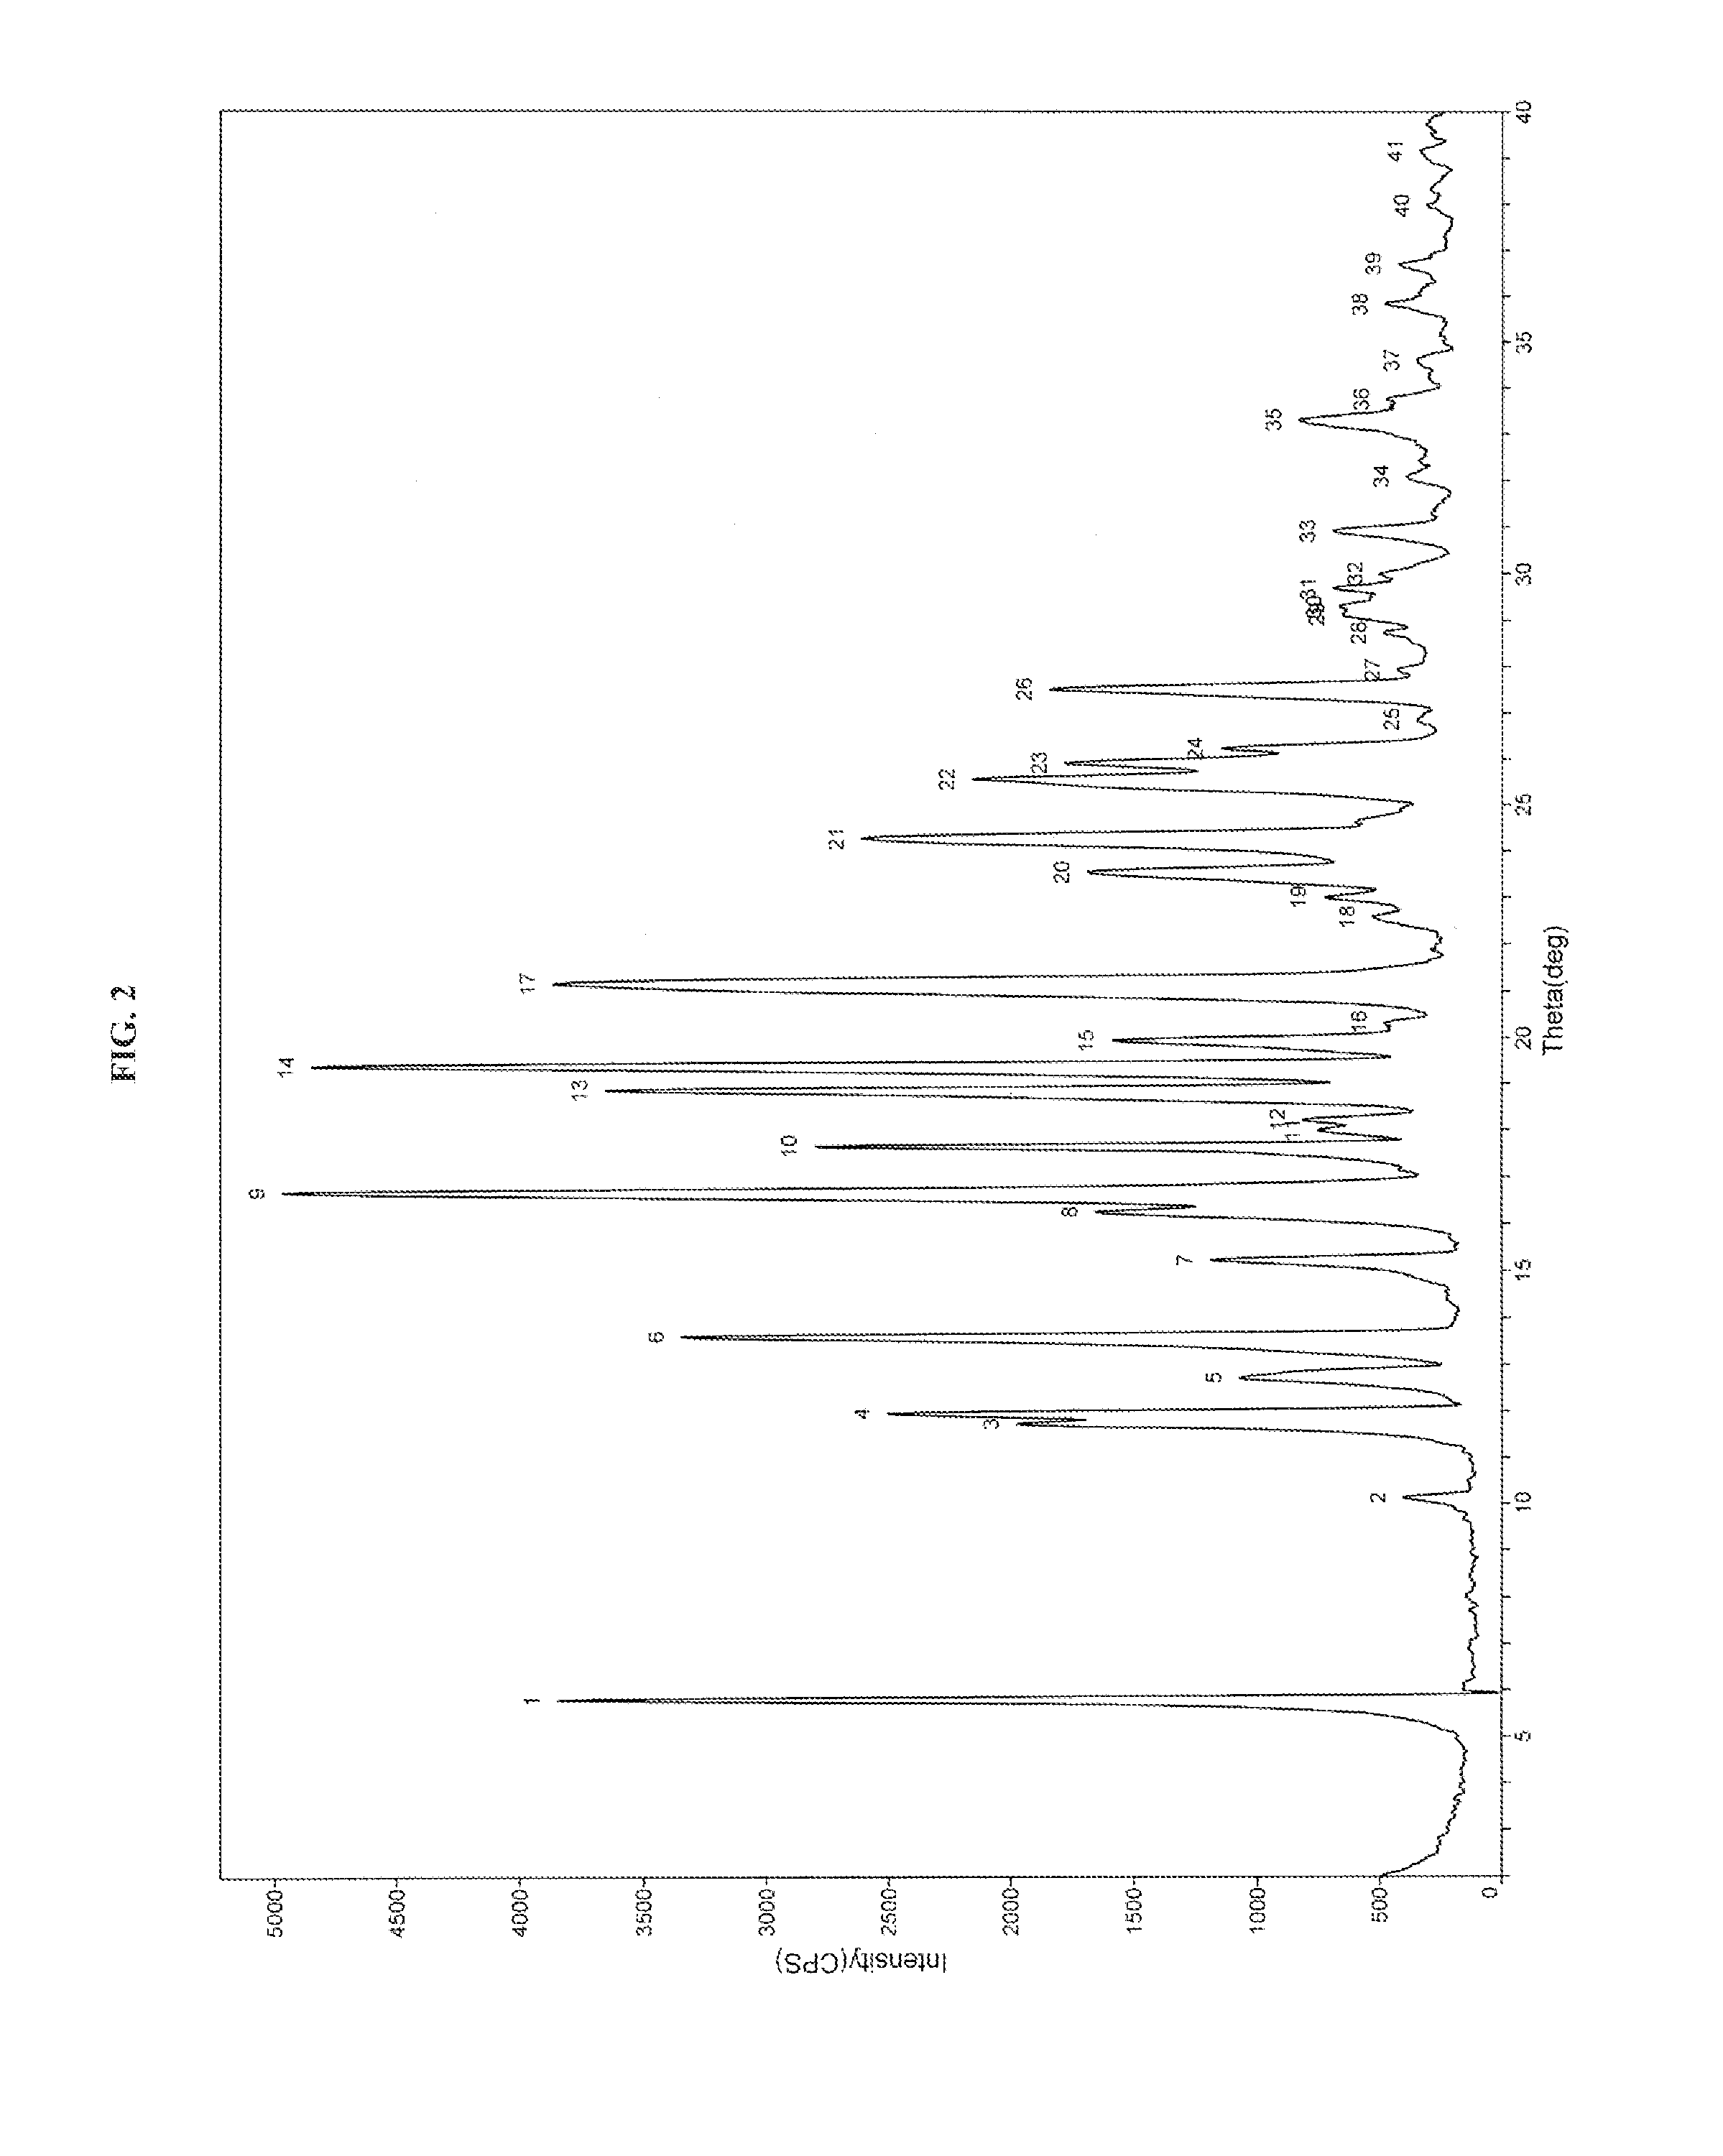 Process for the preparation of dabigatran etexilate mesylate and polymorphs of intermediates thereof